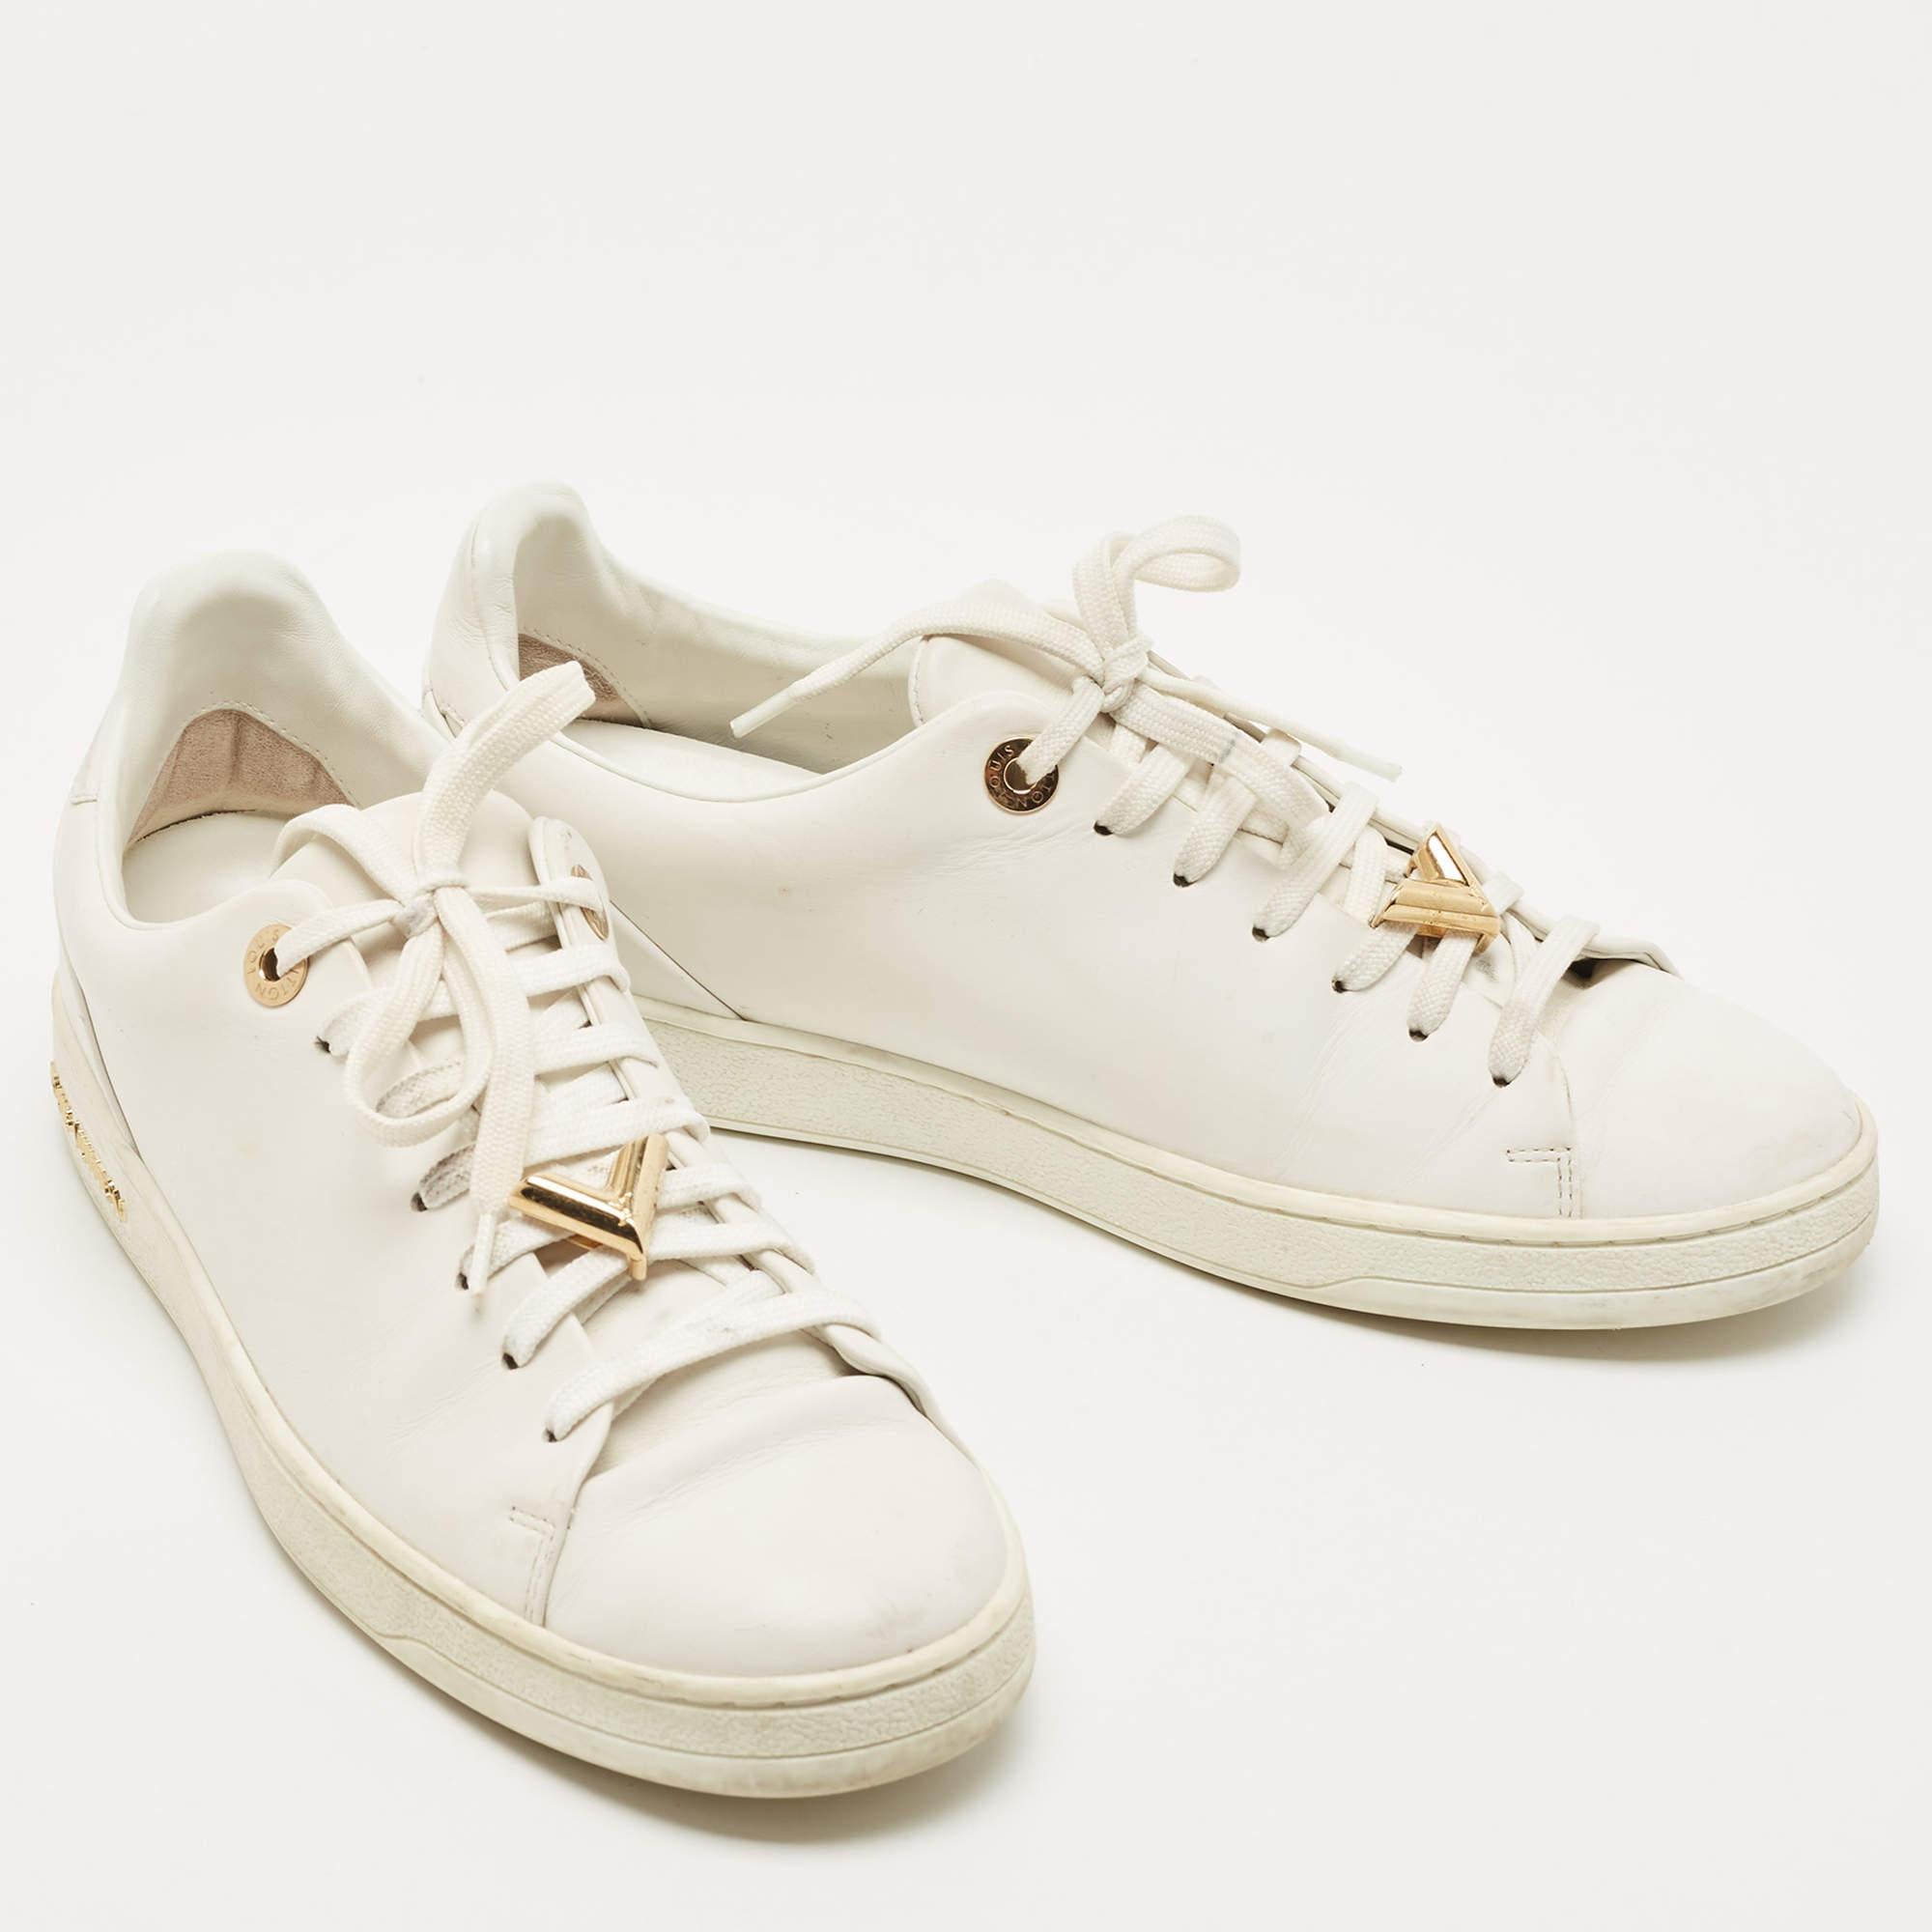 Louis Vuitton White Leather Frontrow Low Top Sneakers Size 37.5 1